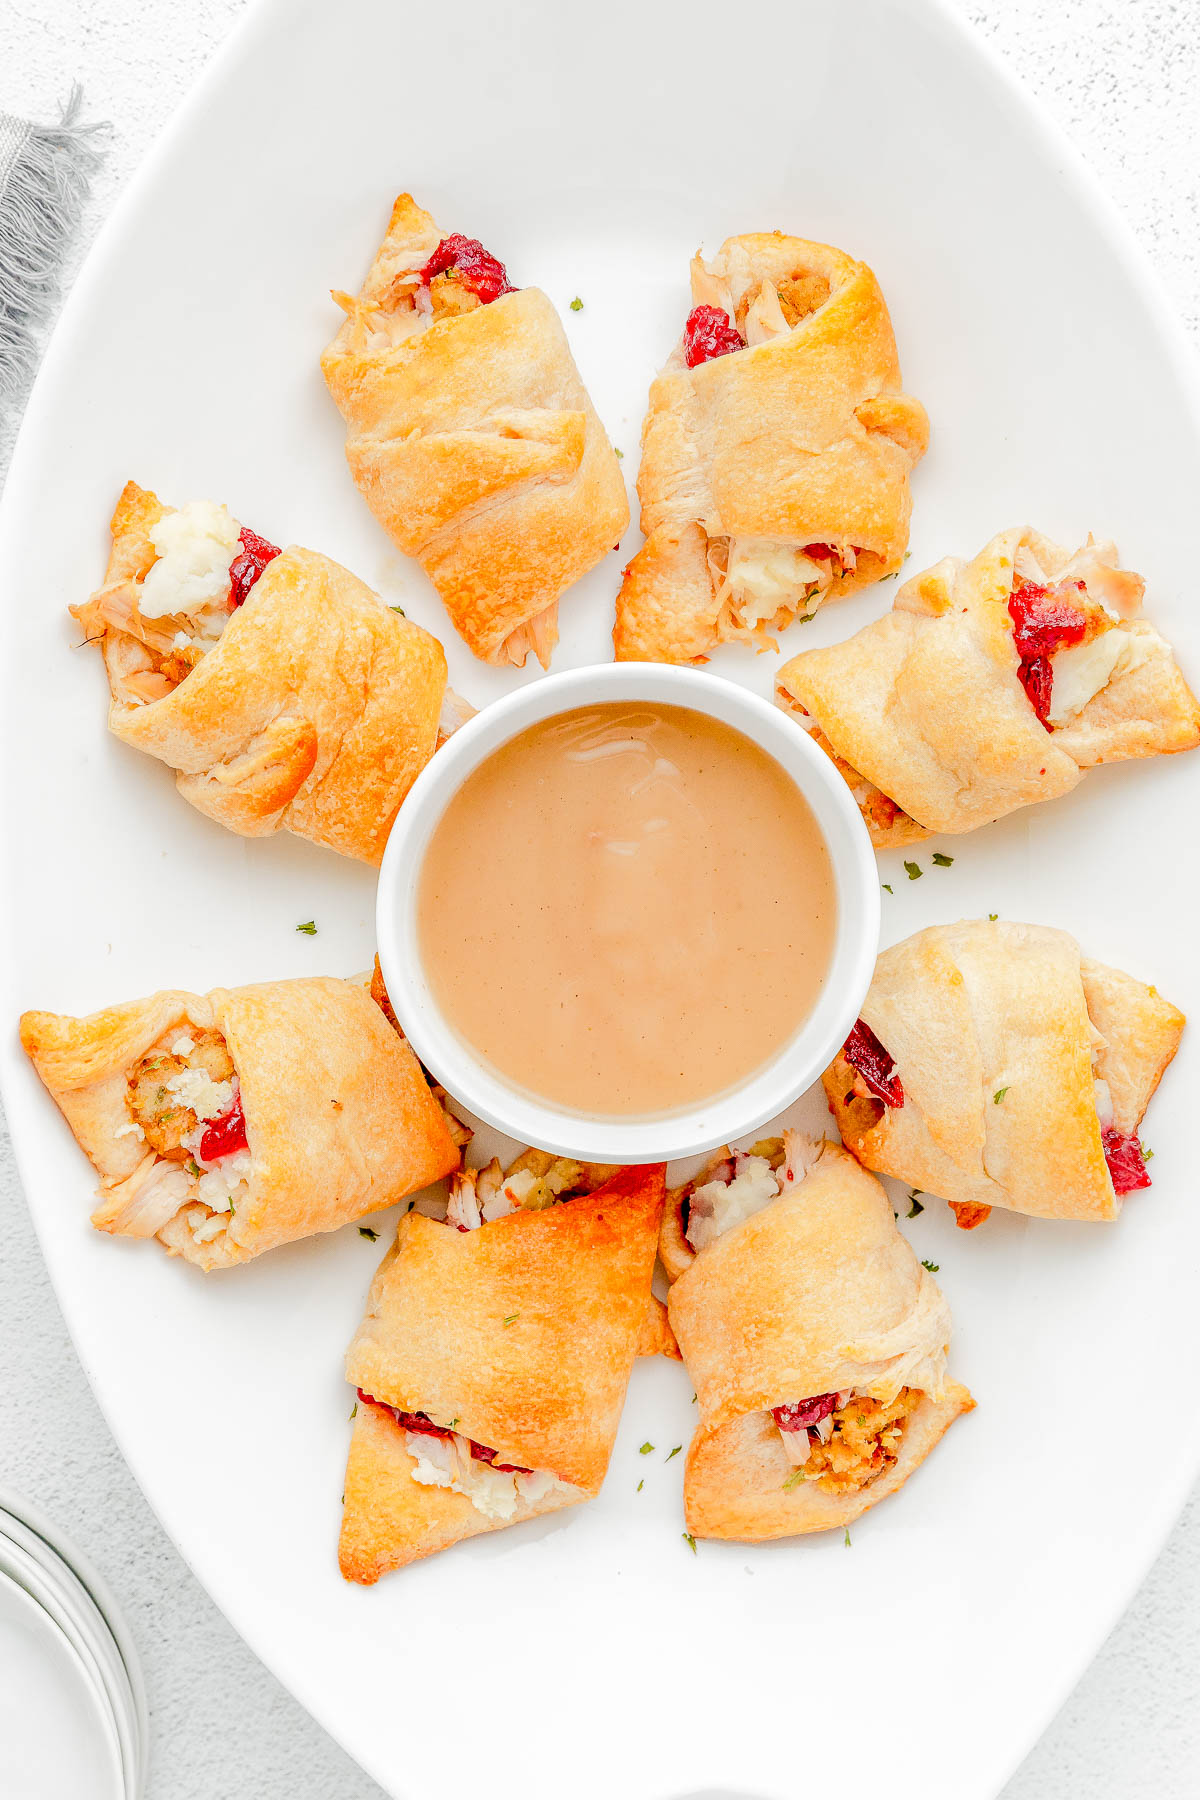 Thanksgiving Leftovers Turkey Crescent Rolls — Looking for a recipe to use a variety of your Thanksgiving leftovers? These stuffed crescent rolls are QUICK and EASY to make using leftovers from your Thanksgiving dinner including turkey, stuffing, mashed potatoes, and gravy! It’s a flexible recipe so feel free to use the leftovers you have on hand to make these crescent roll rollups.